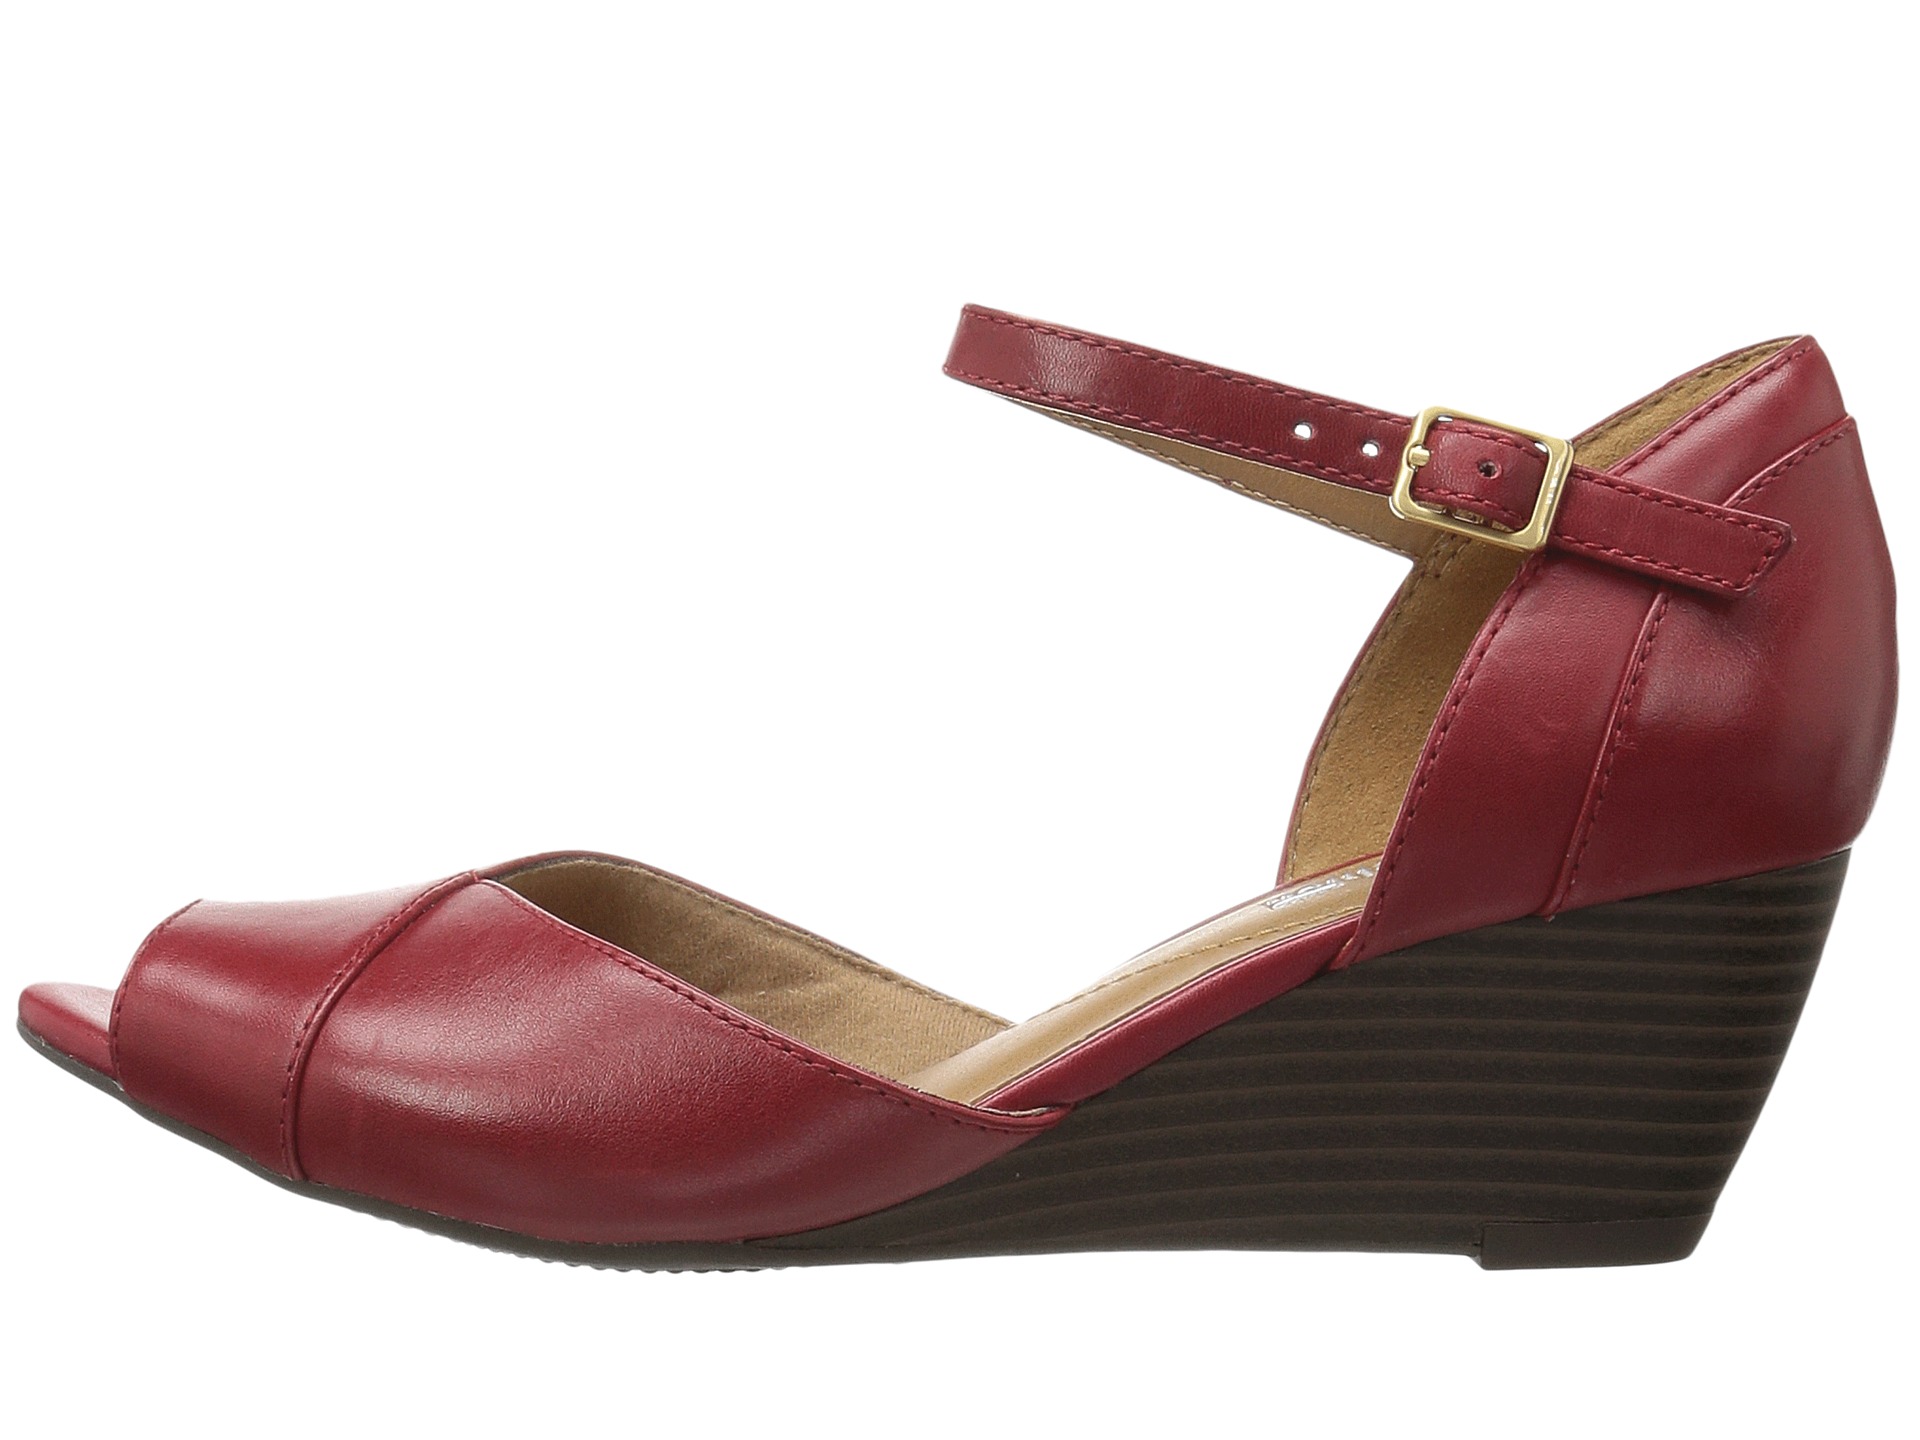 Clarks Brielle Dacy - Zappos.com Free Shipping BOTH Ways